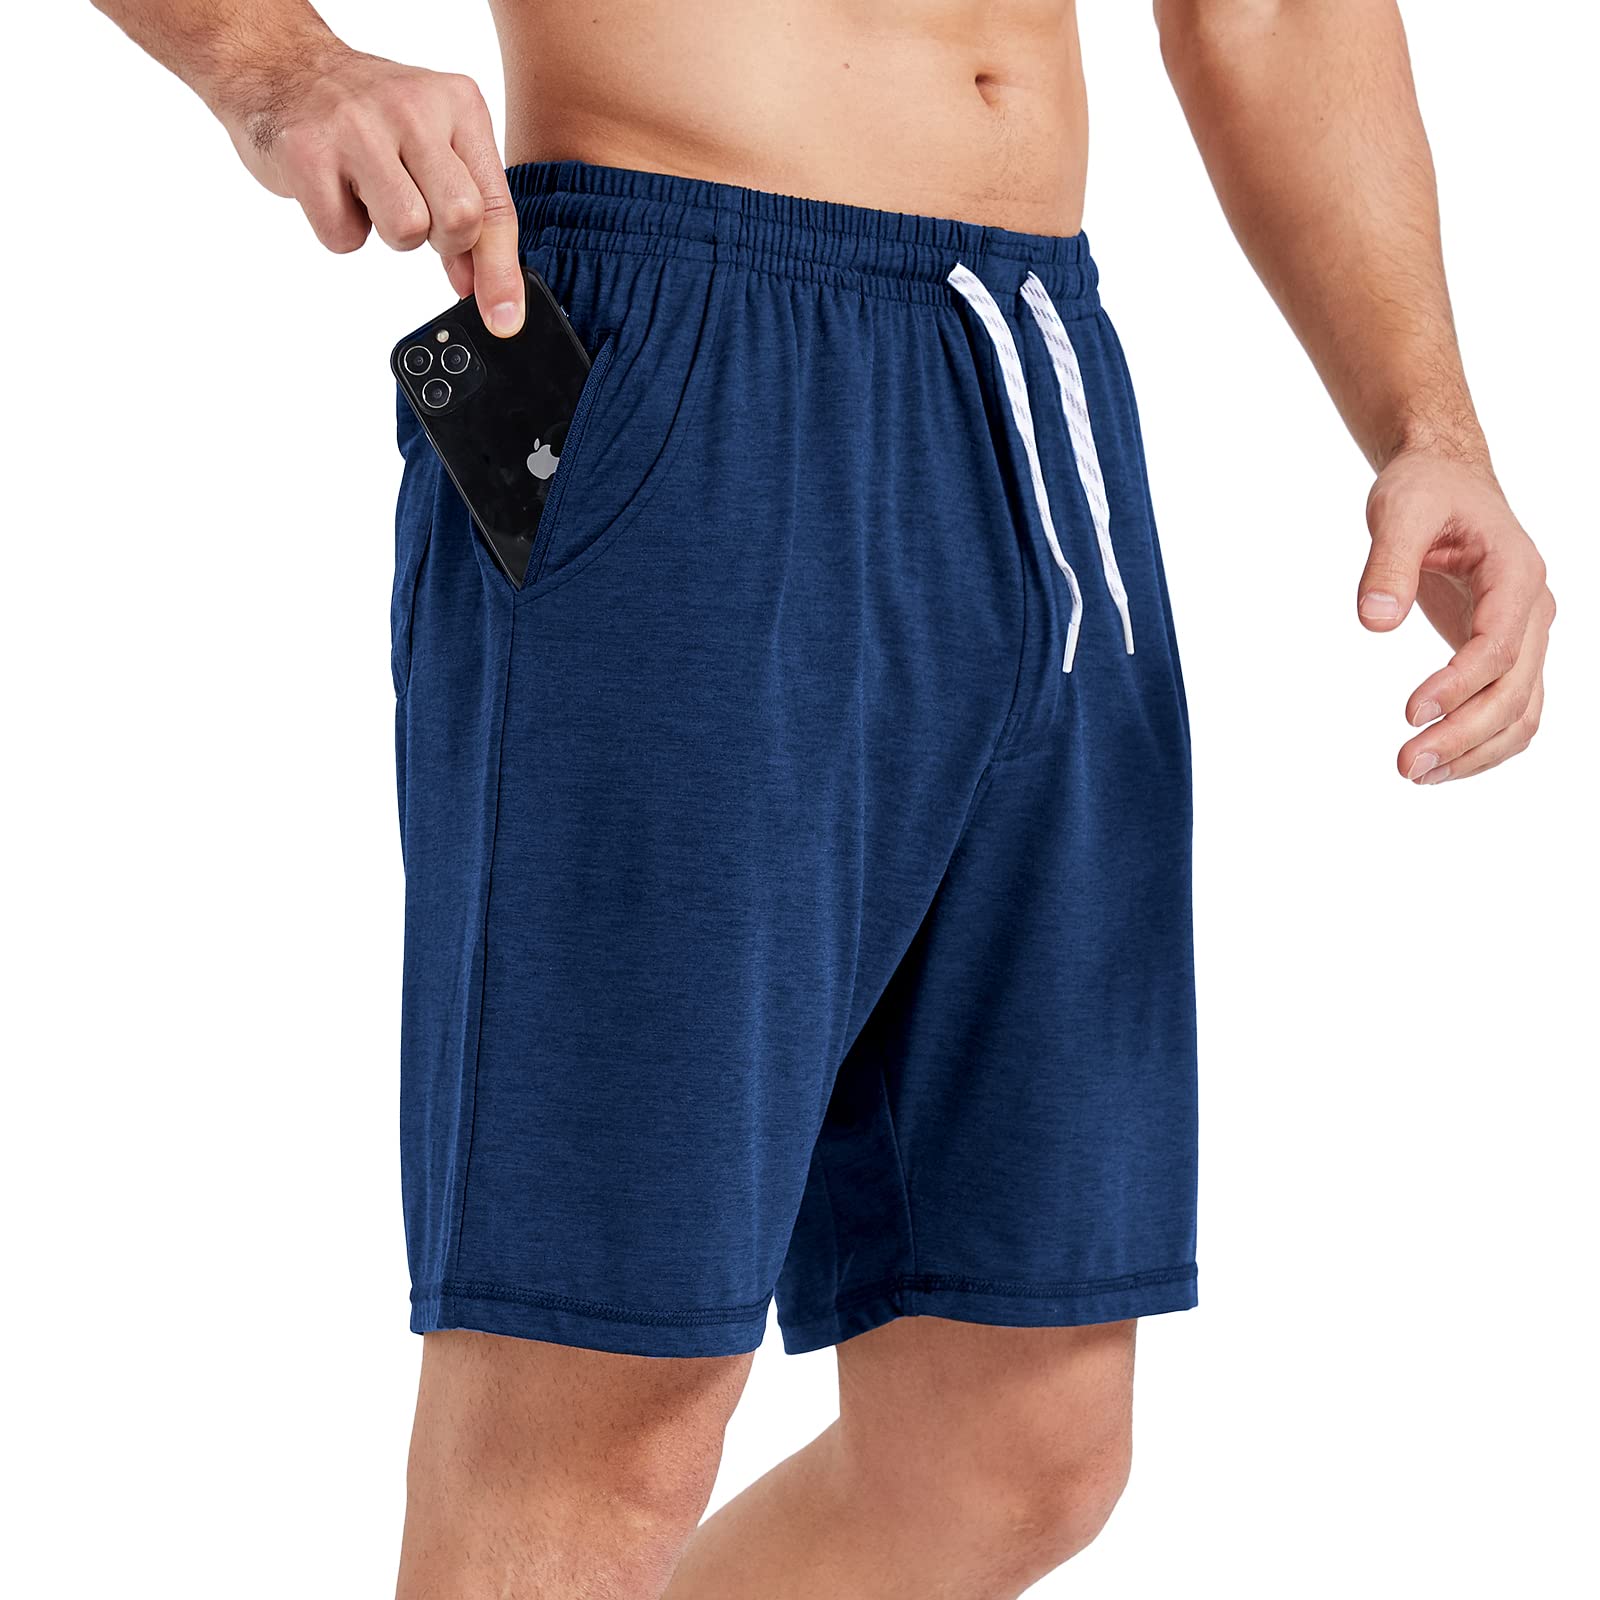 Men Ultra-Soft Athletic Running Shorts with Pockets Moisture-Wick Men's Shorts Navy Heather / S MIER